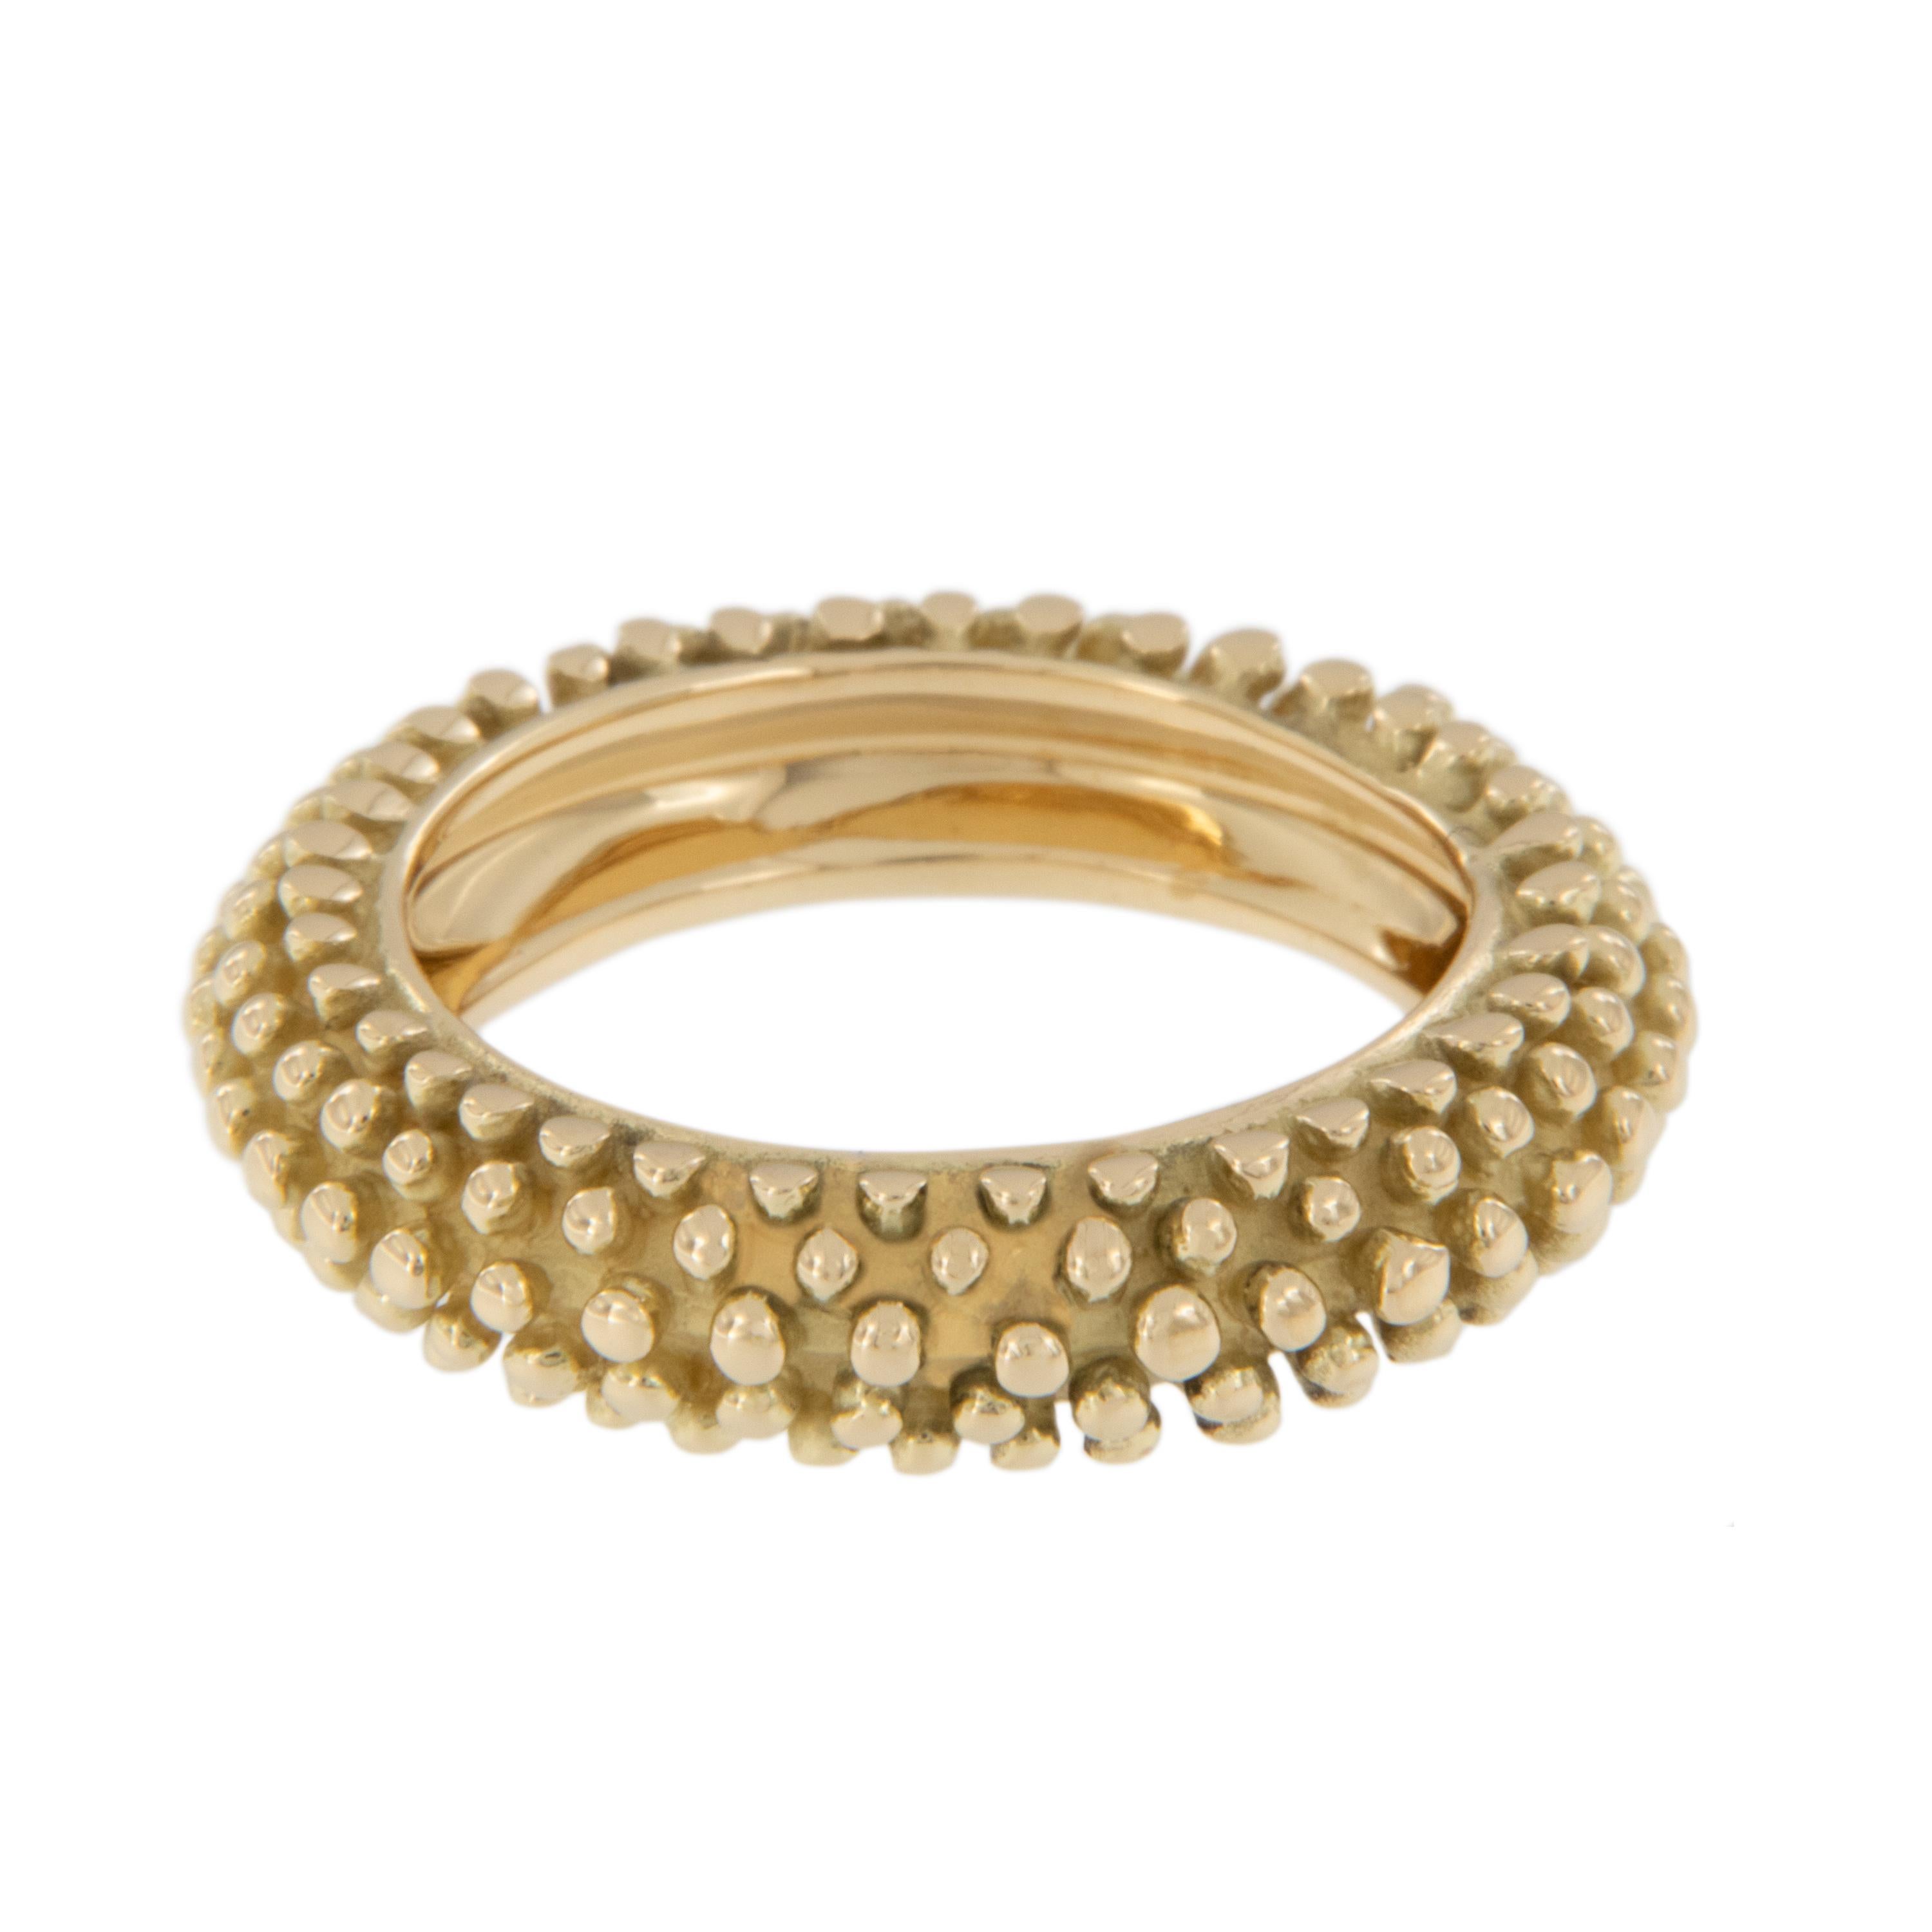 Made from rich 18 karat yellow gold with fun, textured design, this band is a joy to wear! Having a granulated (from Latin: granum = “grain”) surface this ring gives a nod to the Etruscan Style which typically refers to 19th-century jewelry with